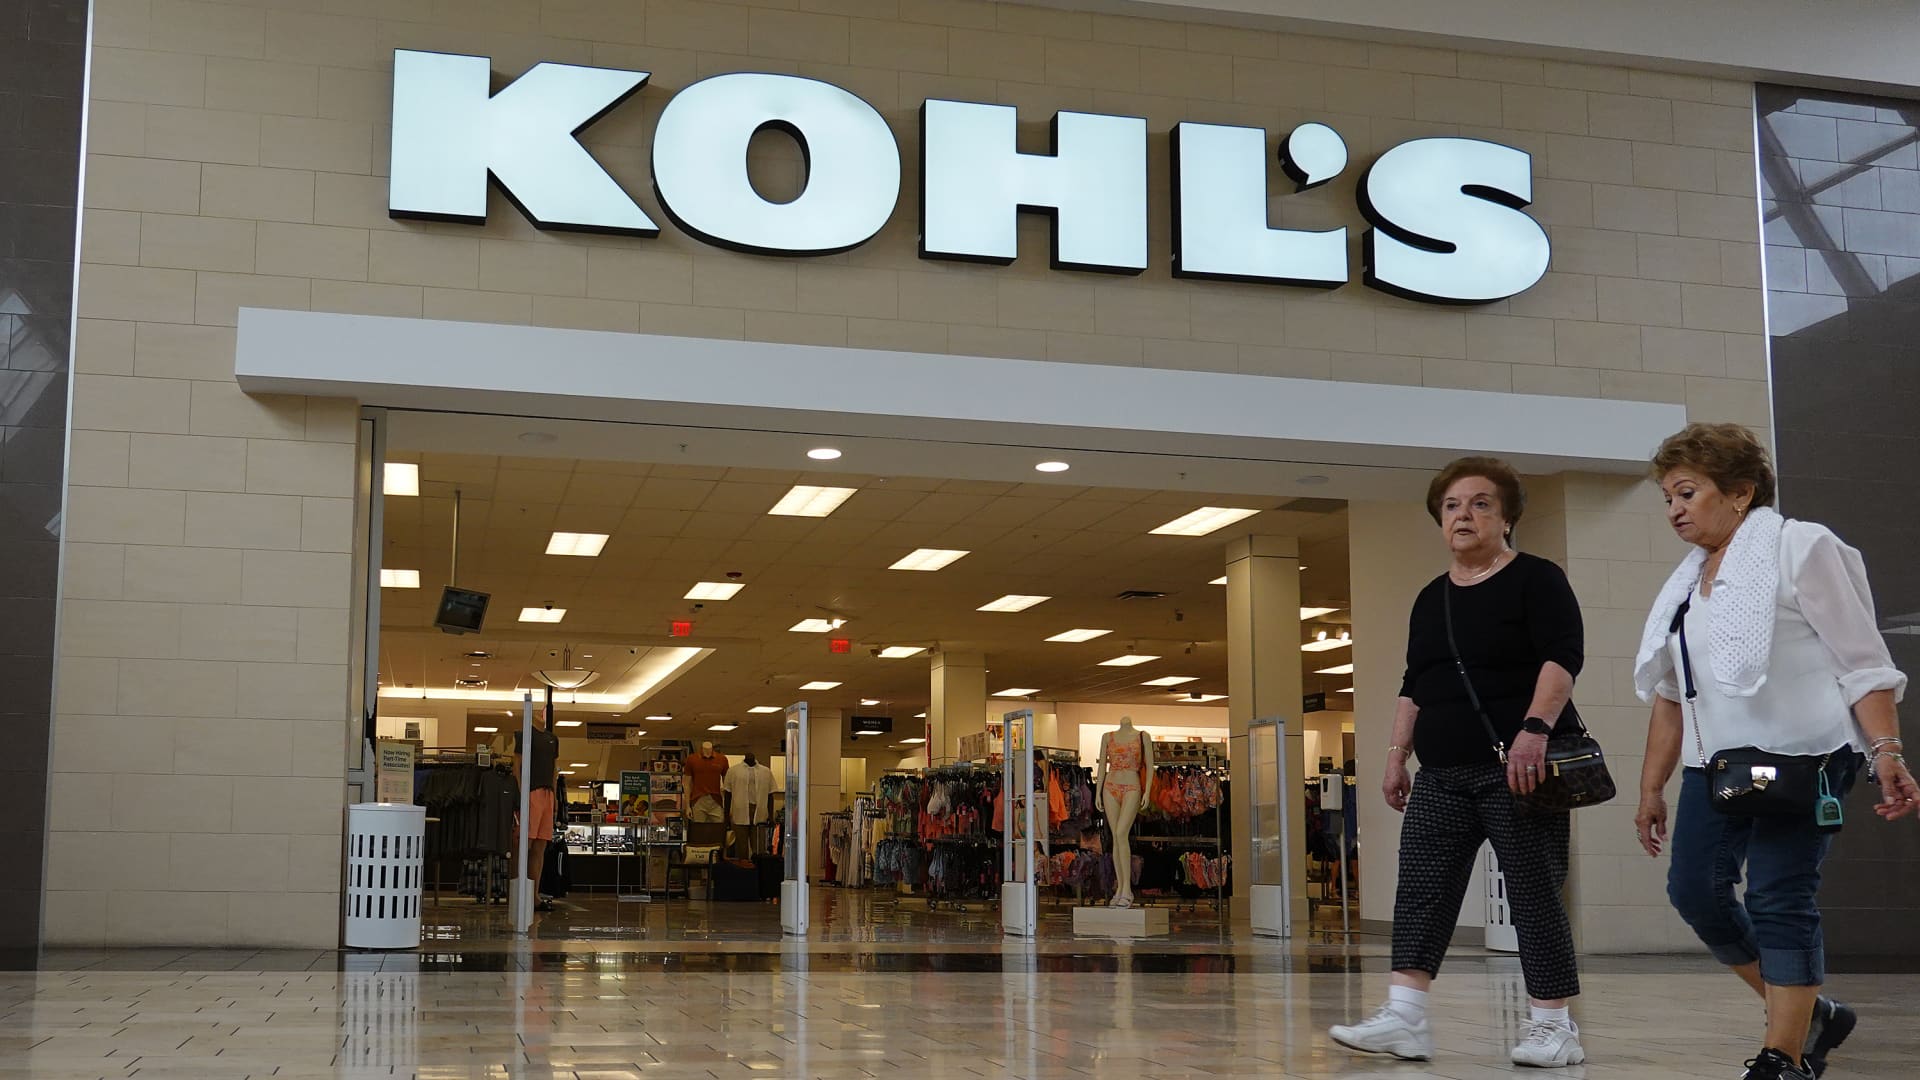 Kohl's: Sephora May Be More Cosmetic Than Substantial (NYSE:KSS